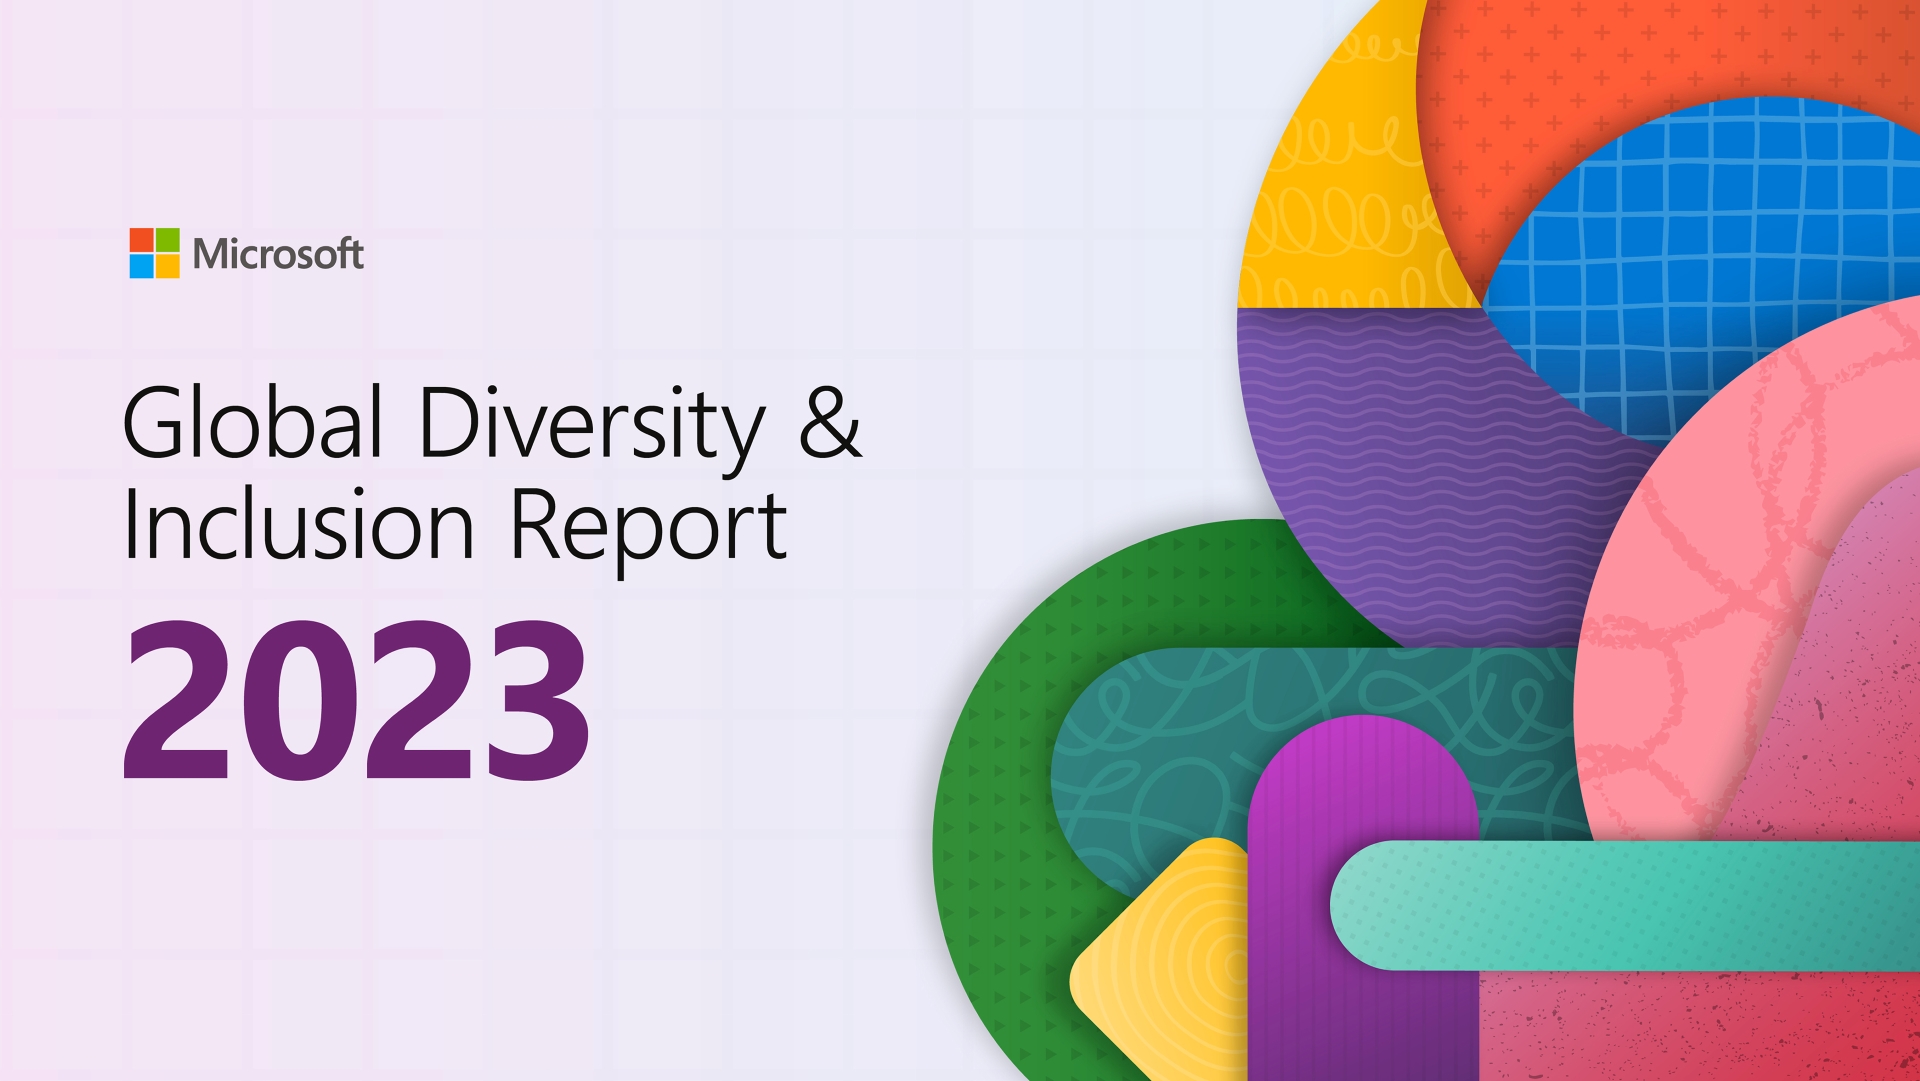 Global diversity and inclusion report artwork